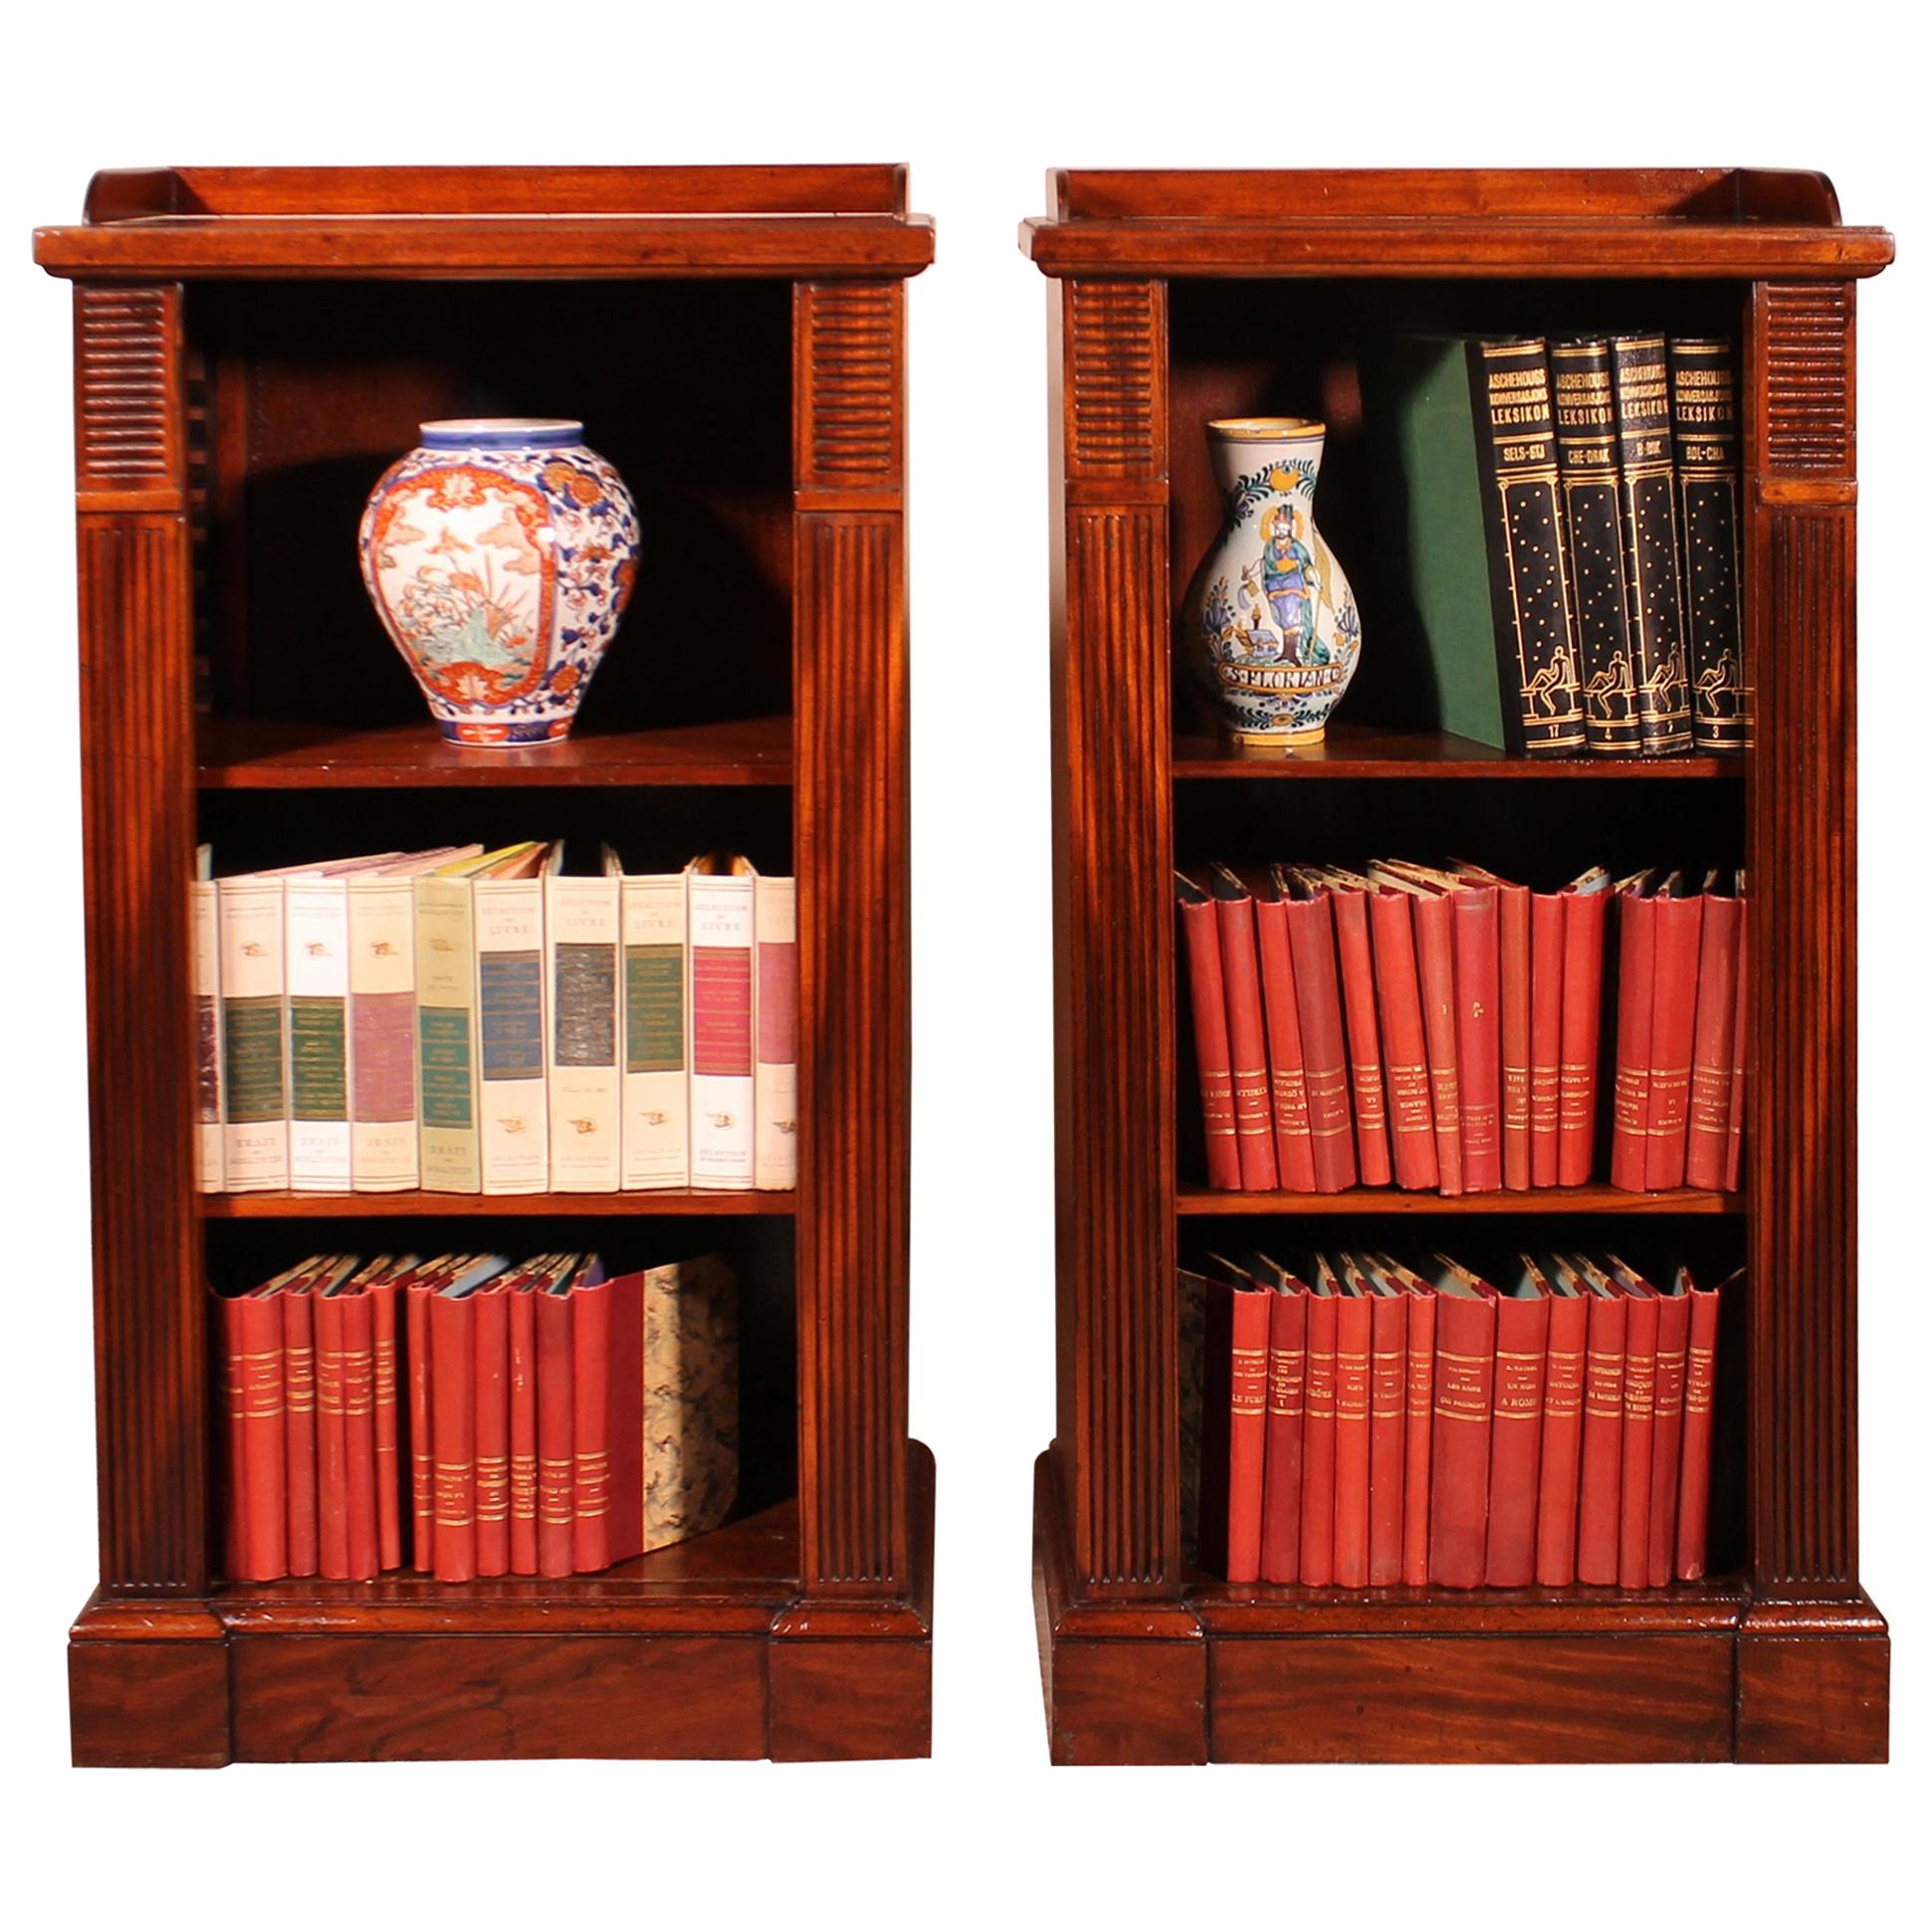 Pair of Open Bookcases from the Beginning of the 19th Century, William IV